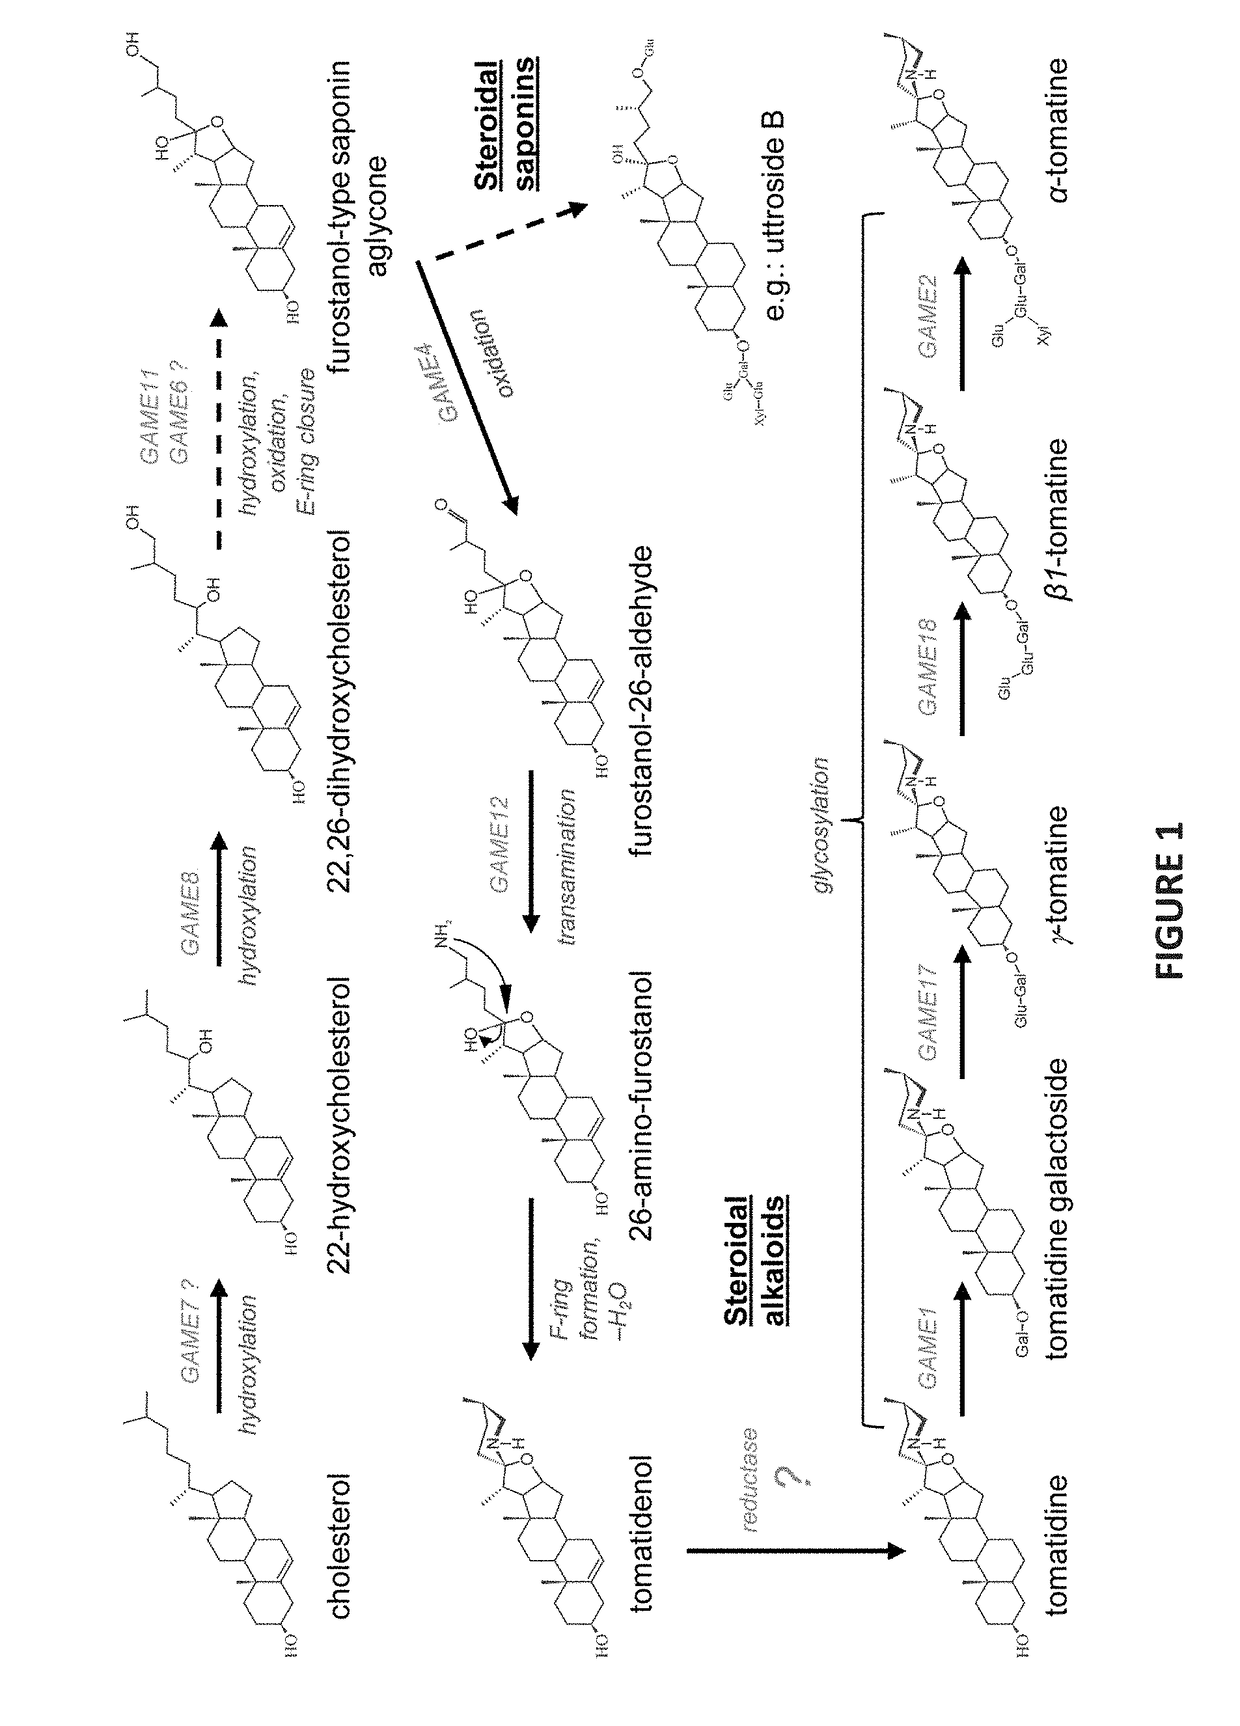 Plant with altered content of steroidal alkaloids